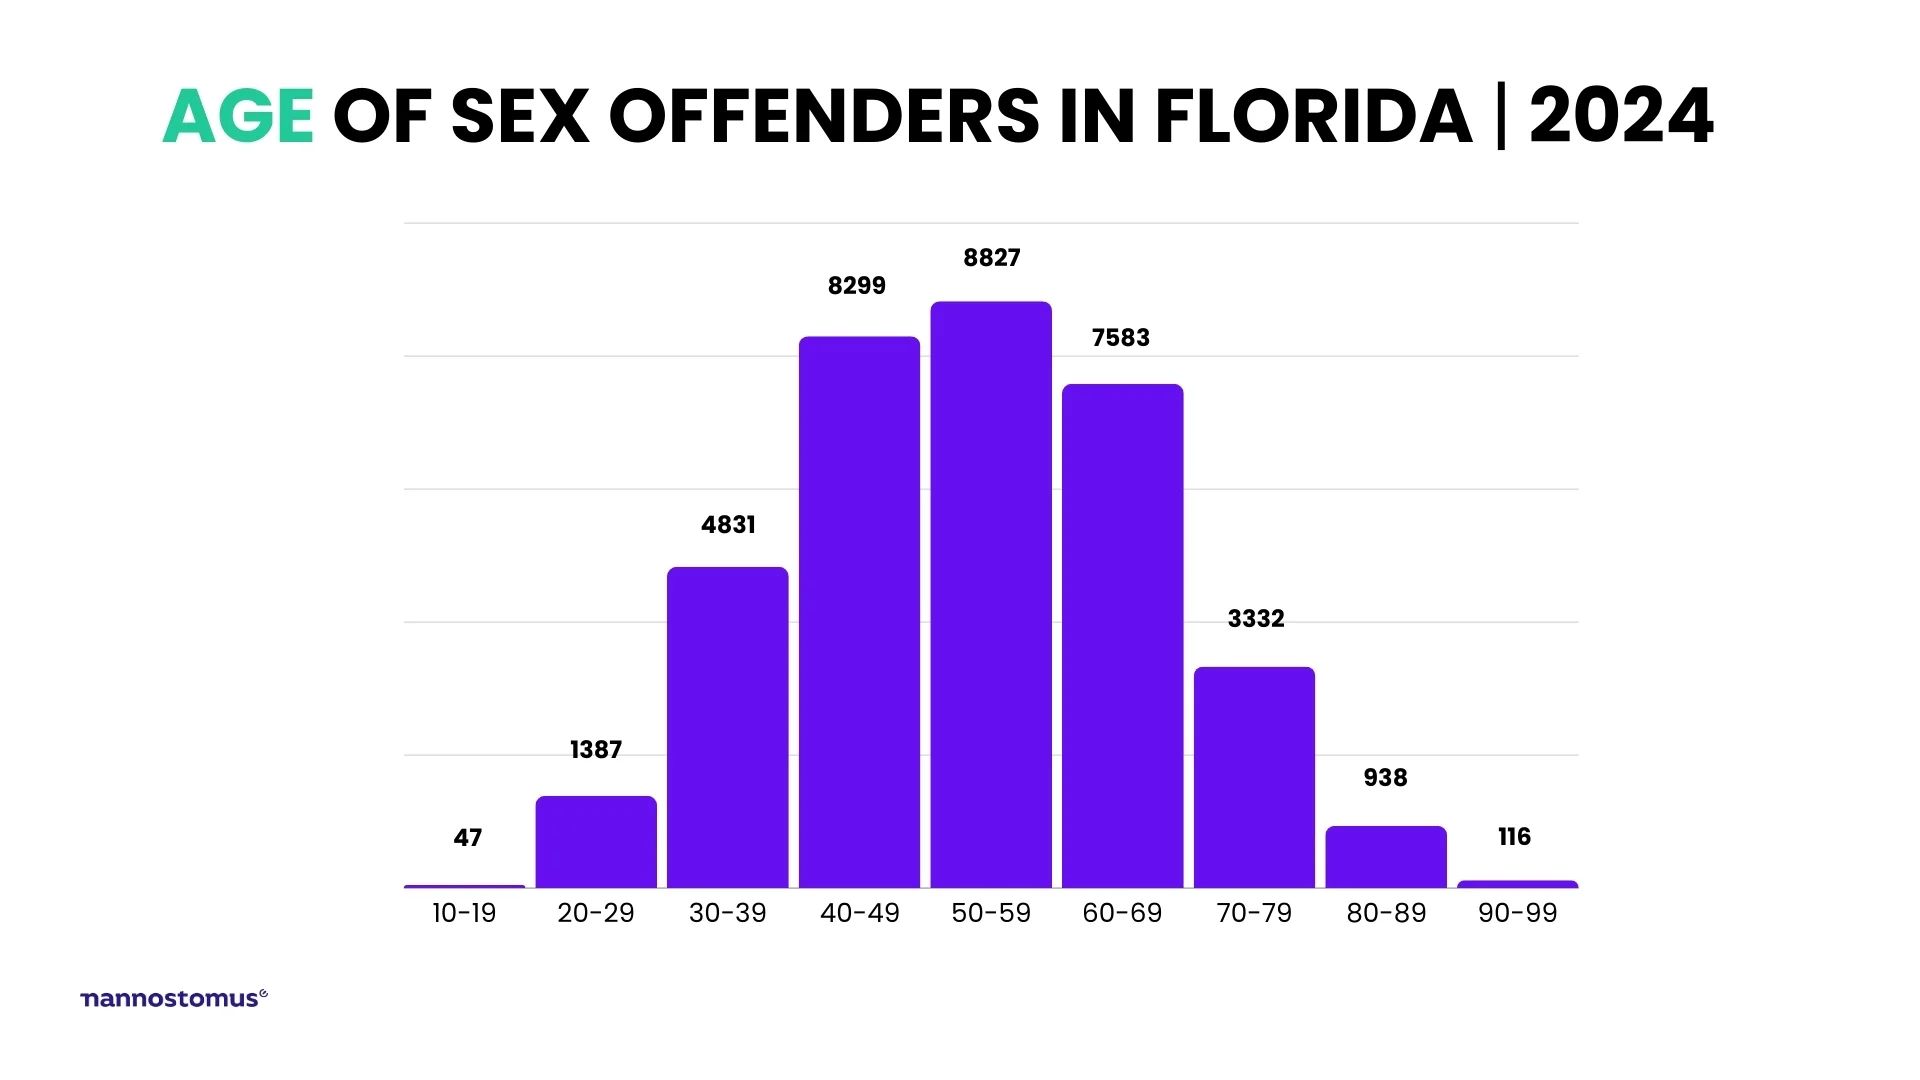 Sex offenders in Florida based on age